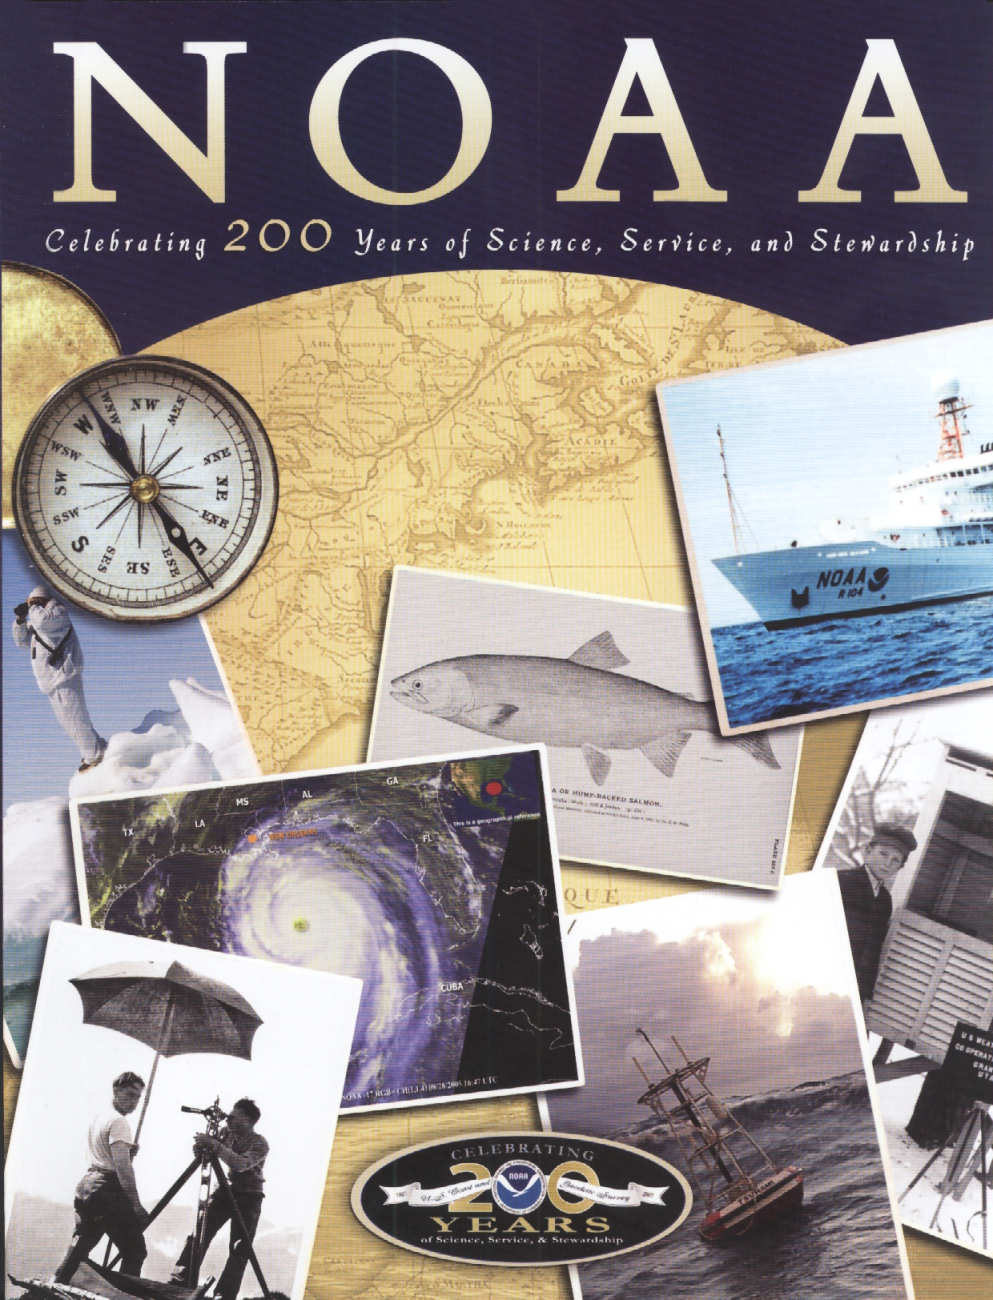 Cover of NOAA magazine that was published to accompany the 200thAnniversary of the founding of NOAA's oldest ancestor agency